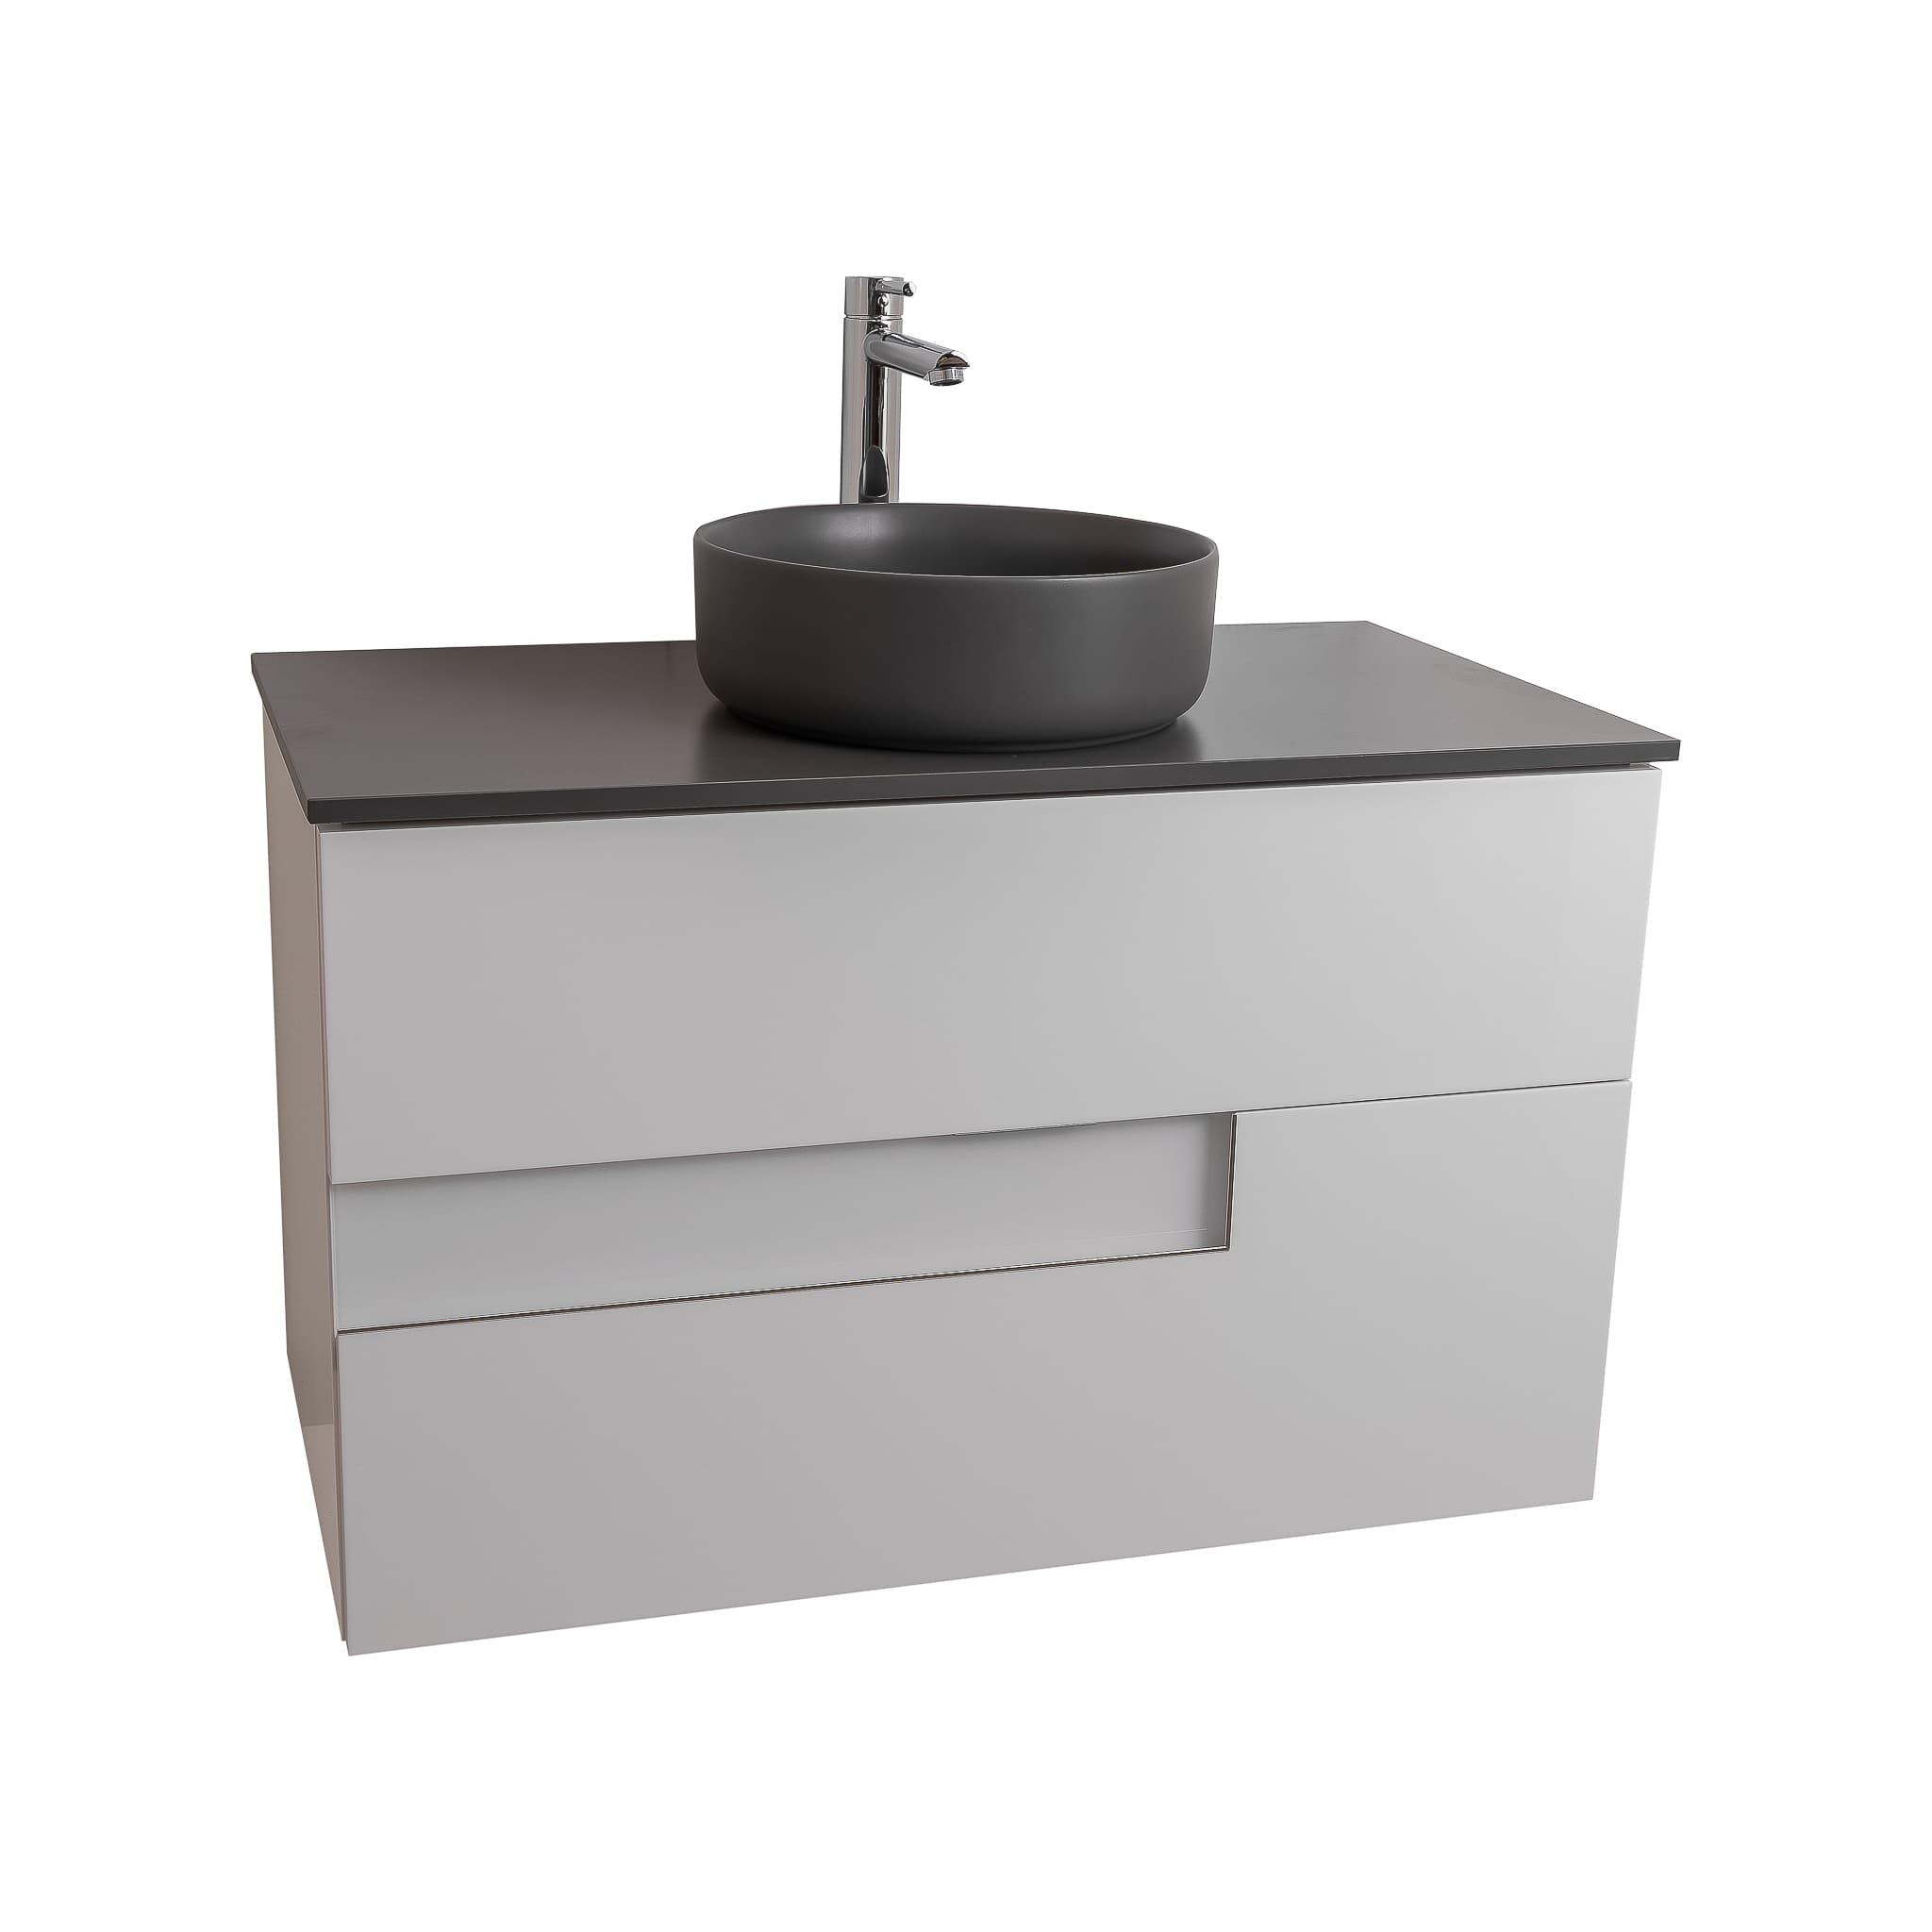 Vision 35.5 White High Gloss Cabinet, Ares Grey Ceniza Top And Ares Grey Ceniza Ceramic Basin, Wall Mounted Modern Vanity Set